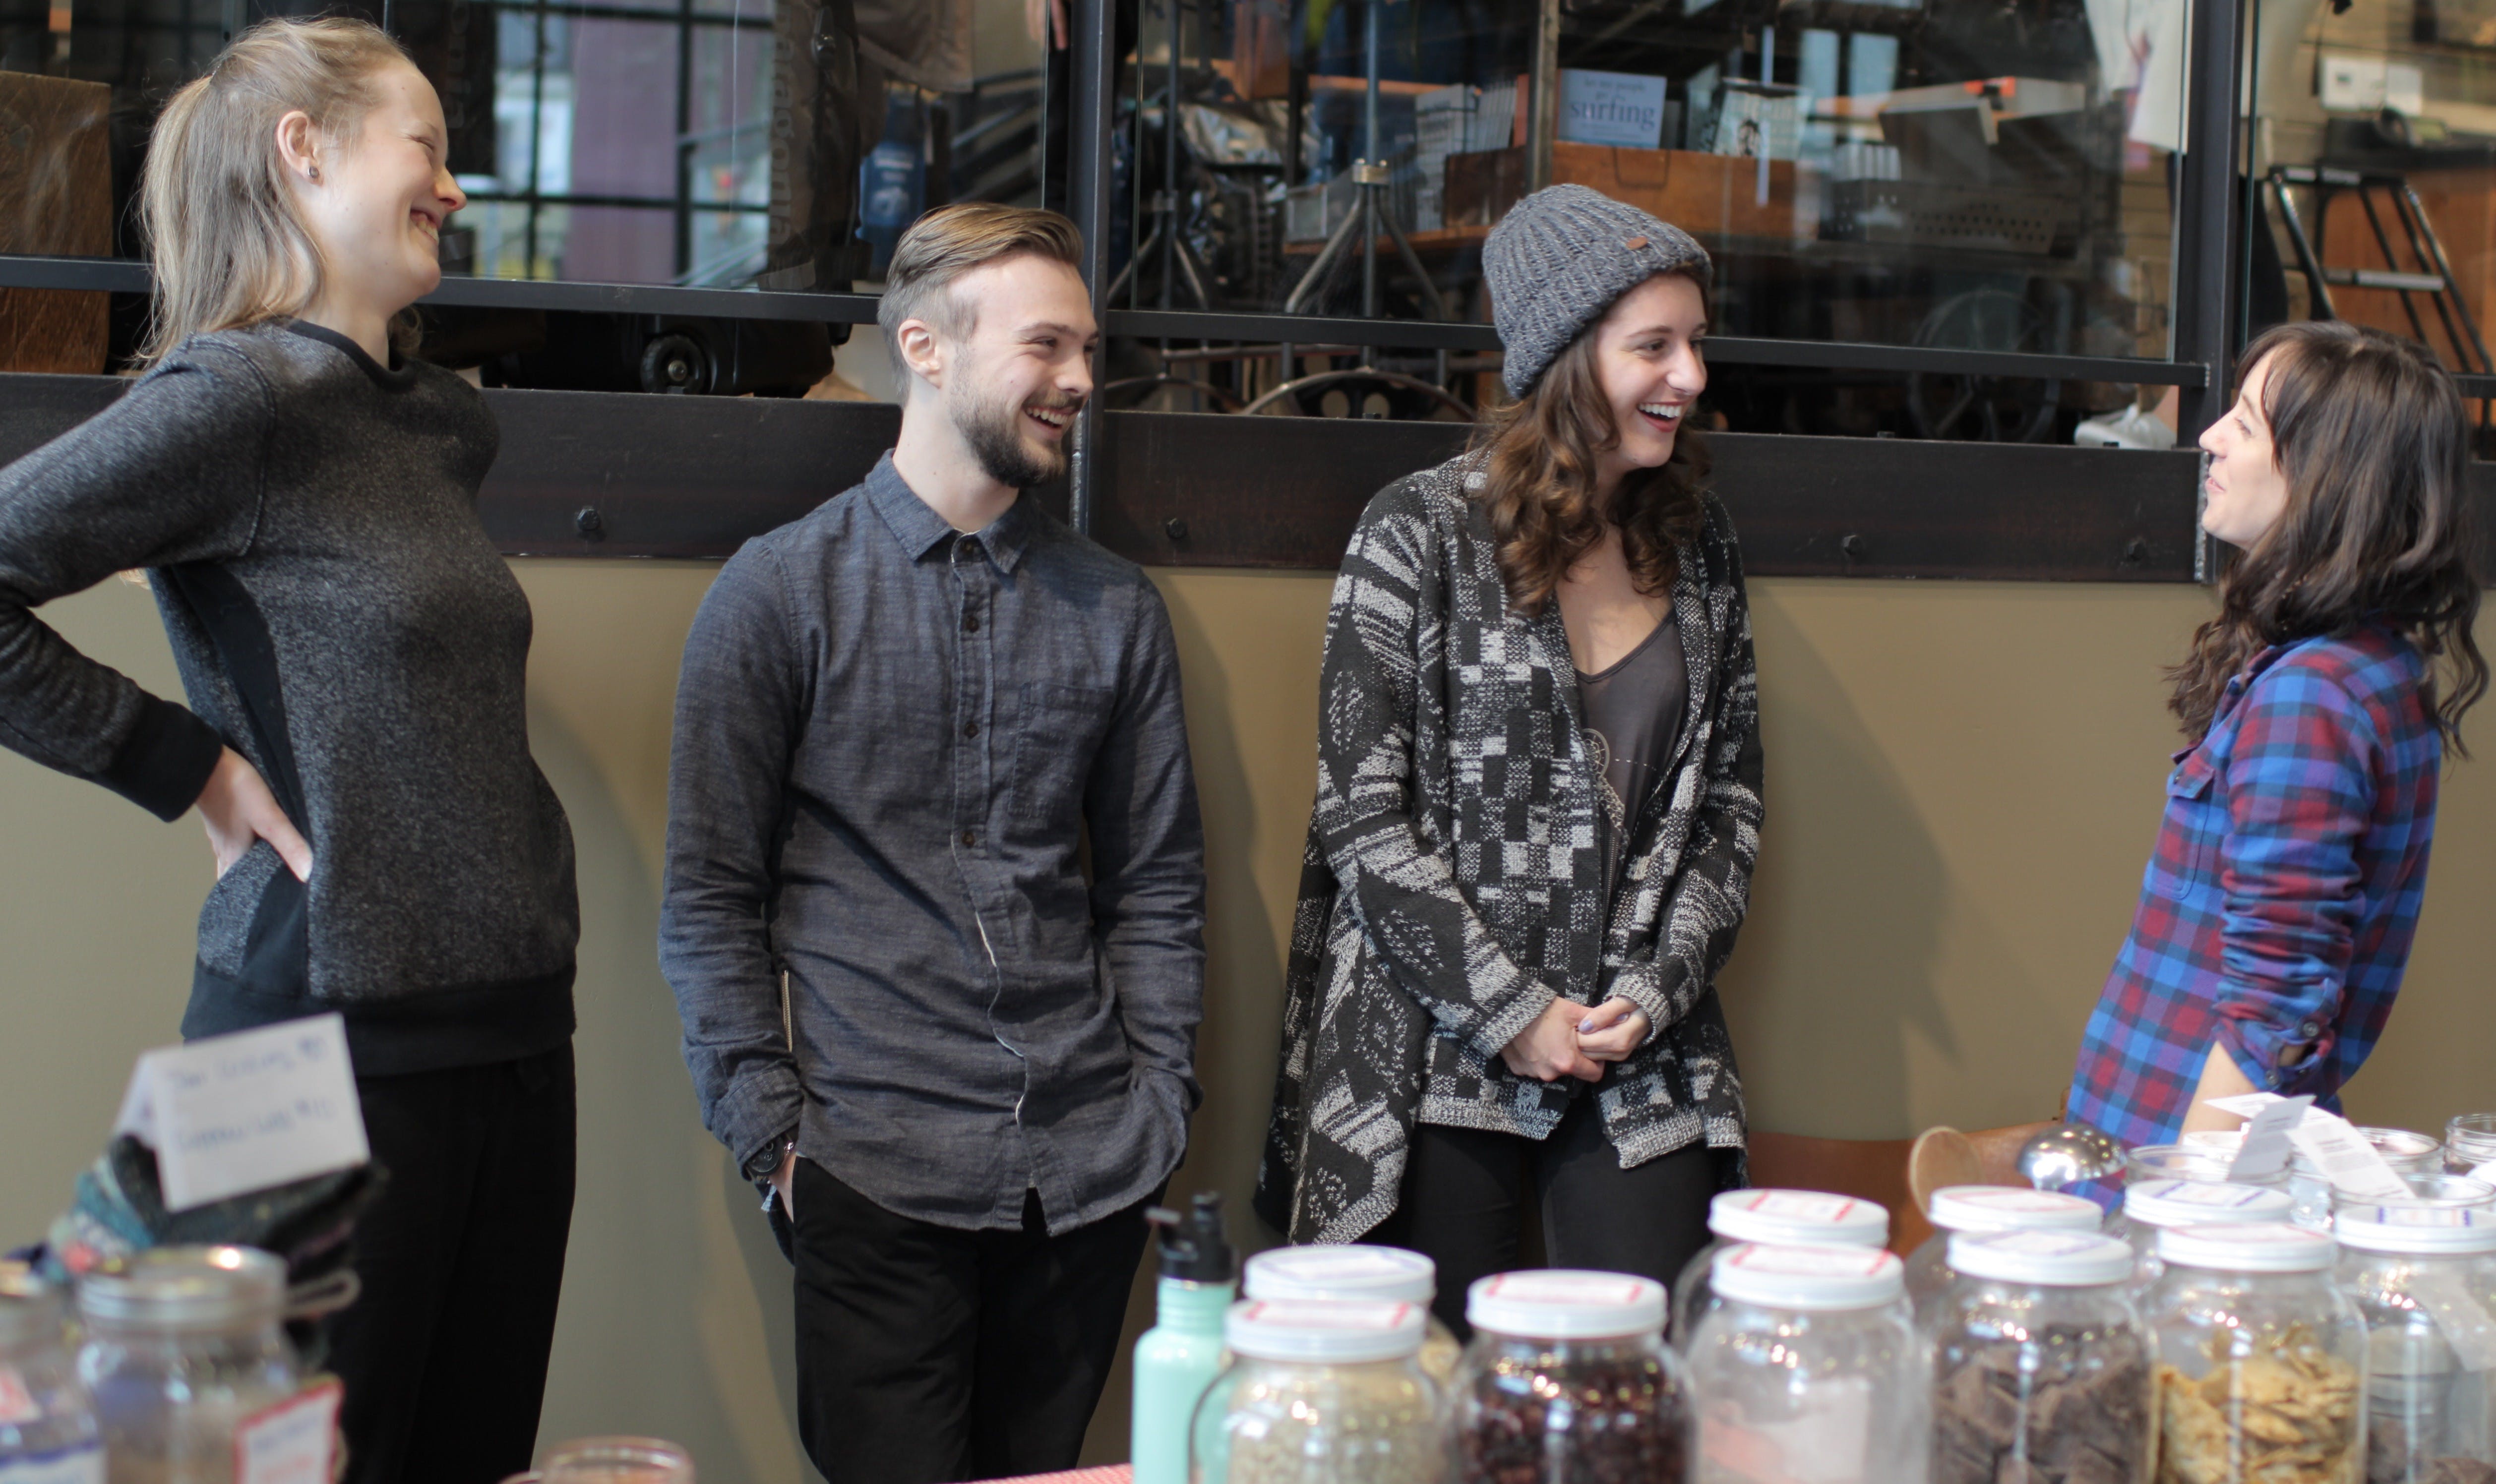 Co-founder of Canada's first zero-waste market, Brianne Miller (right), is seen with other volunteers of the pop-up store. Photo Credit: Jenny Peng